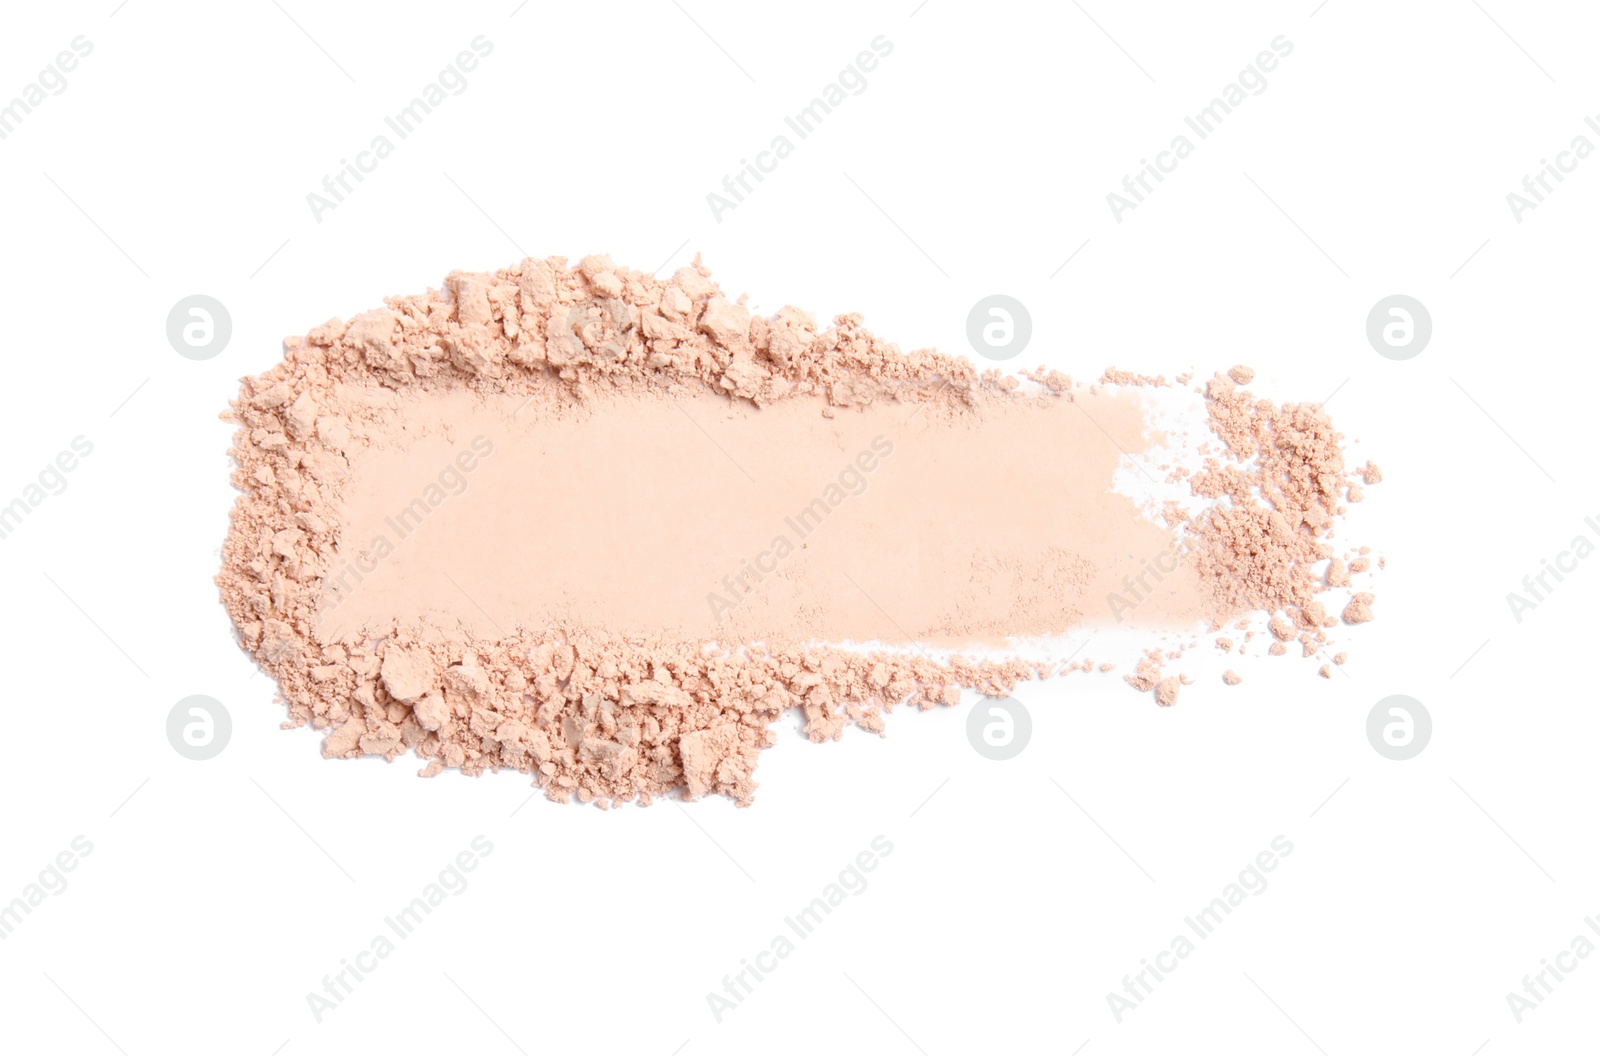 Photo of Swatch of crushed face powder on white background, top view